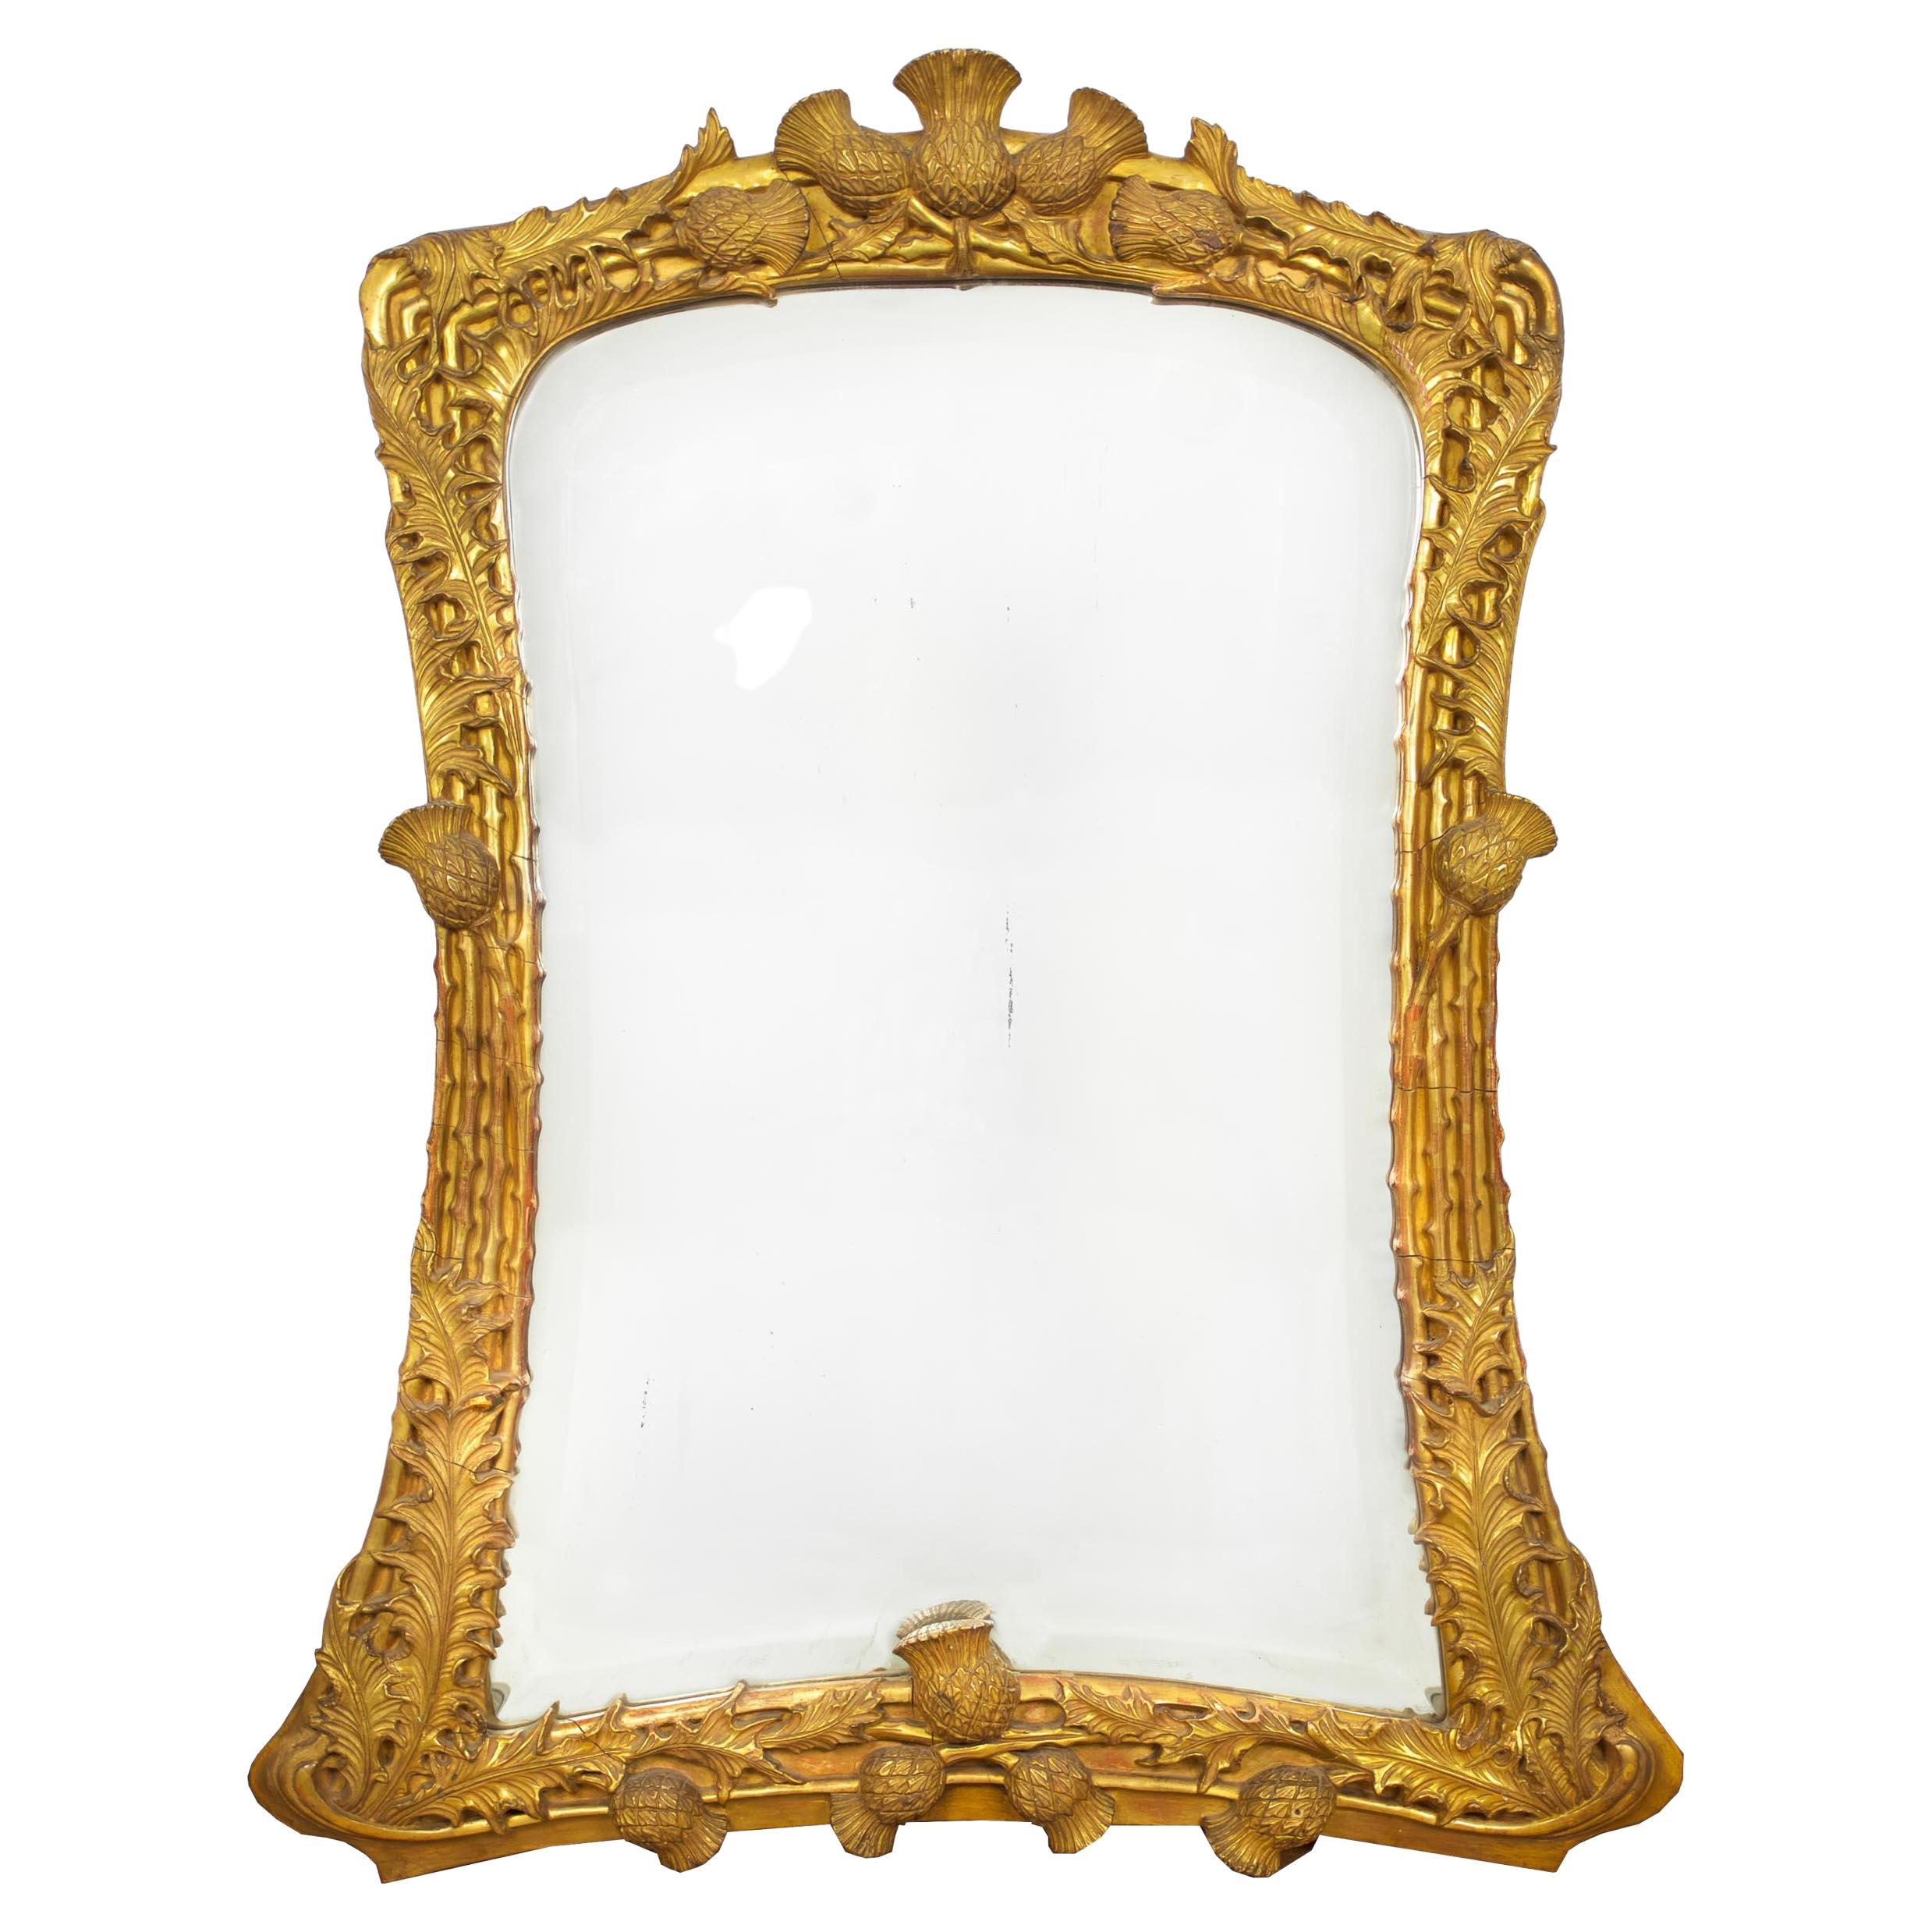 19th Century Thistle-Carved Giltwood Mirror, Probably Scottish